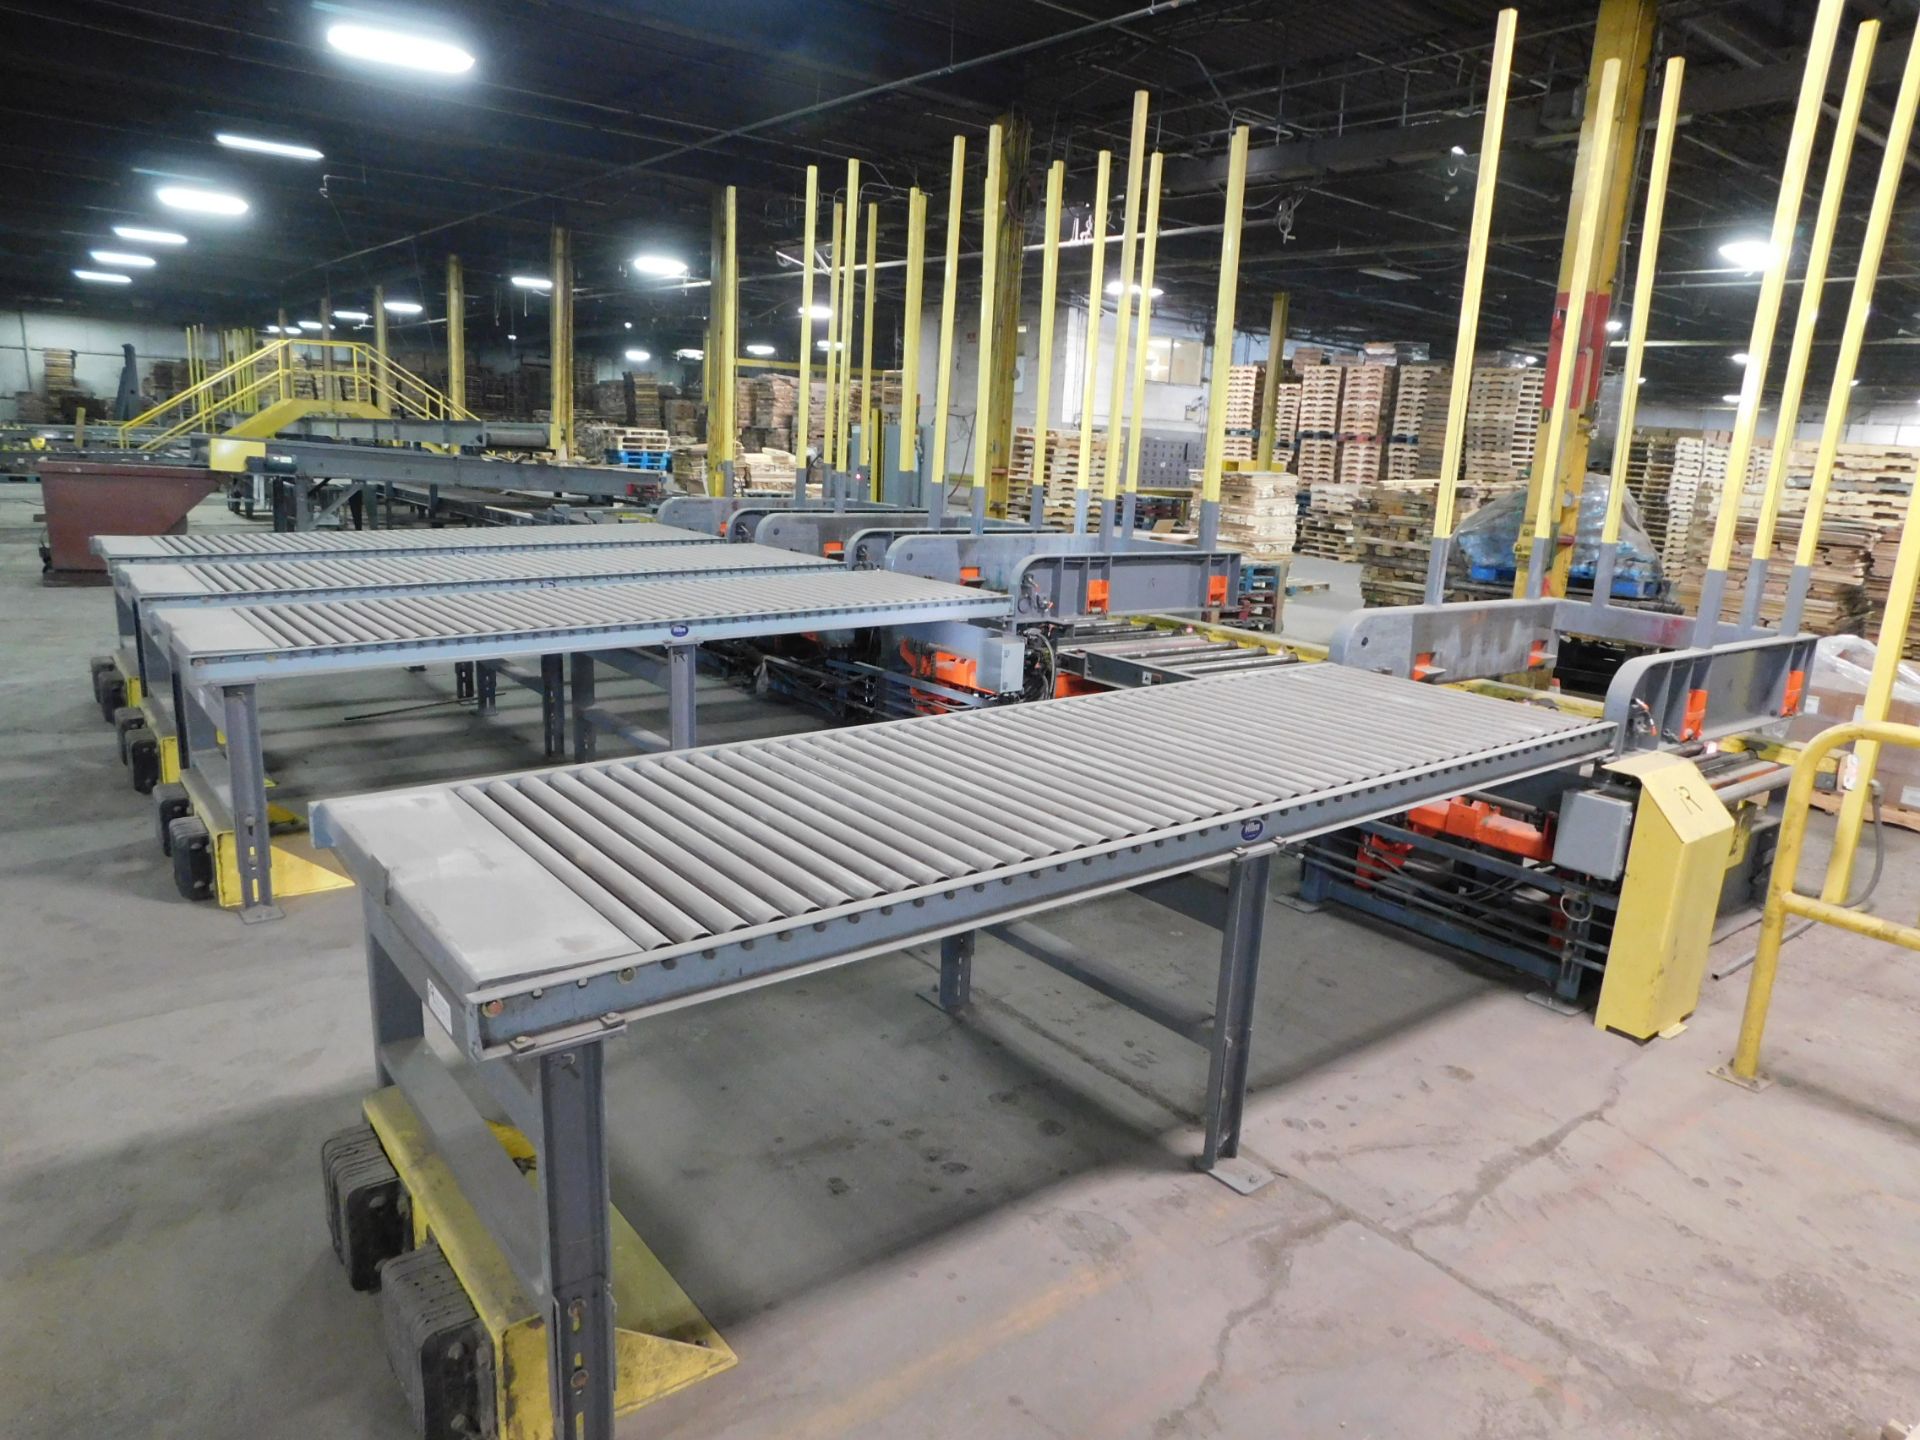 2017 Industrial Resources 6+ Station Pallet Sorting and Repair System, (4) 48" x 150" Infeed - Image 24 of 31